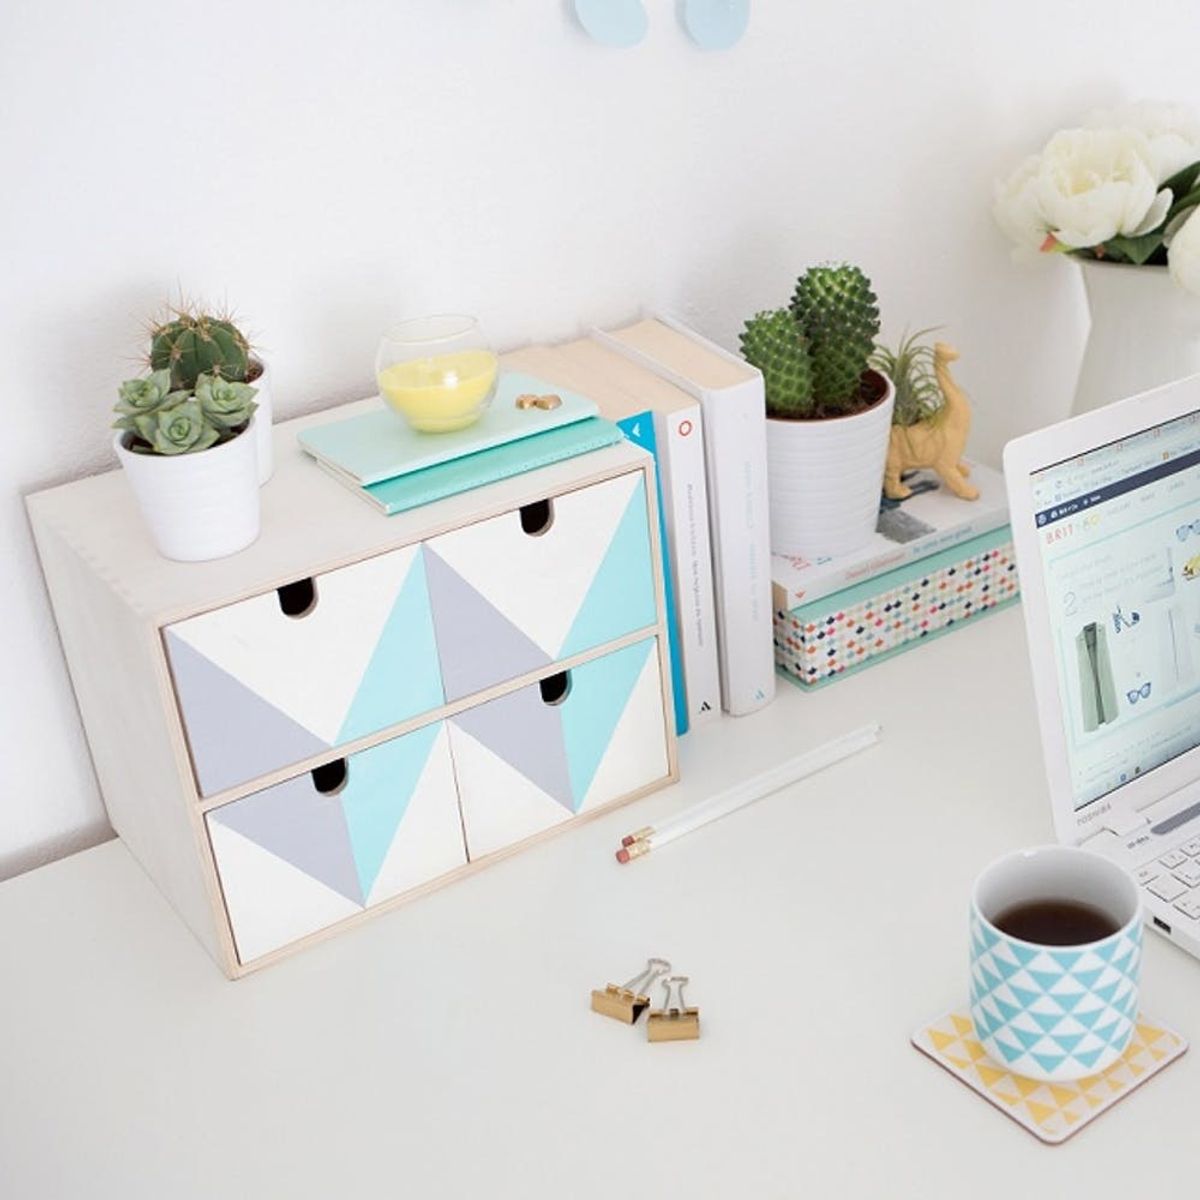 Try This IKEA Hack to Freshen Up Your Desk